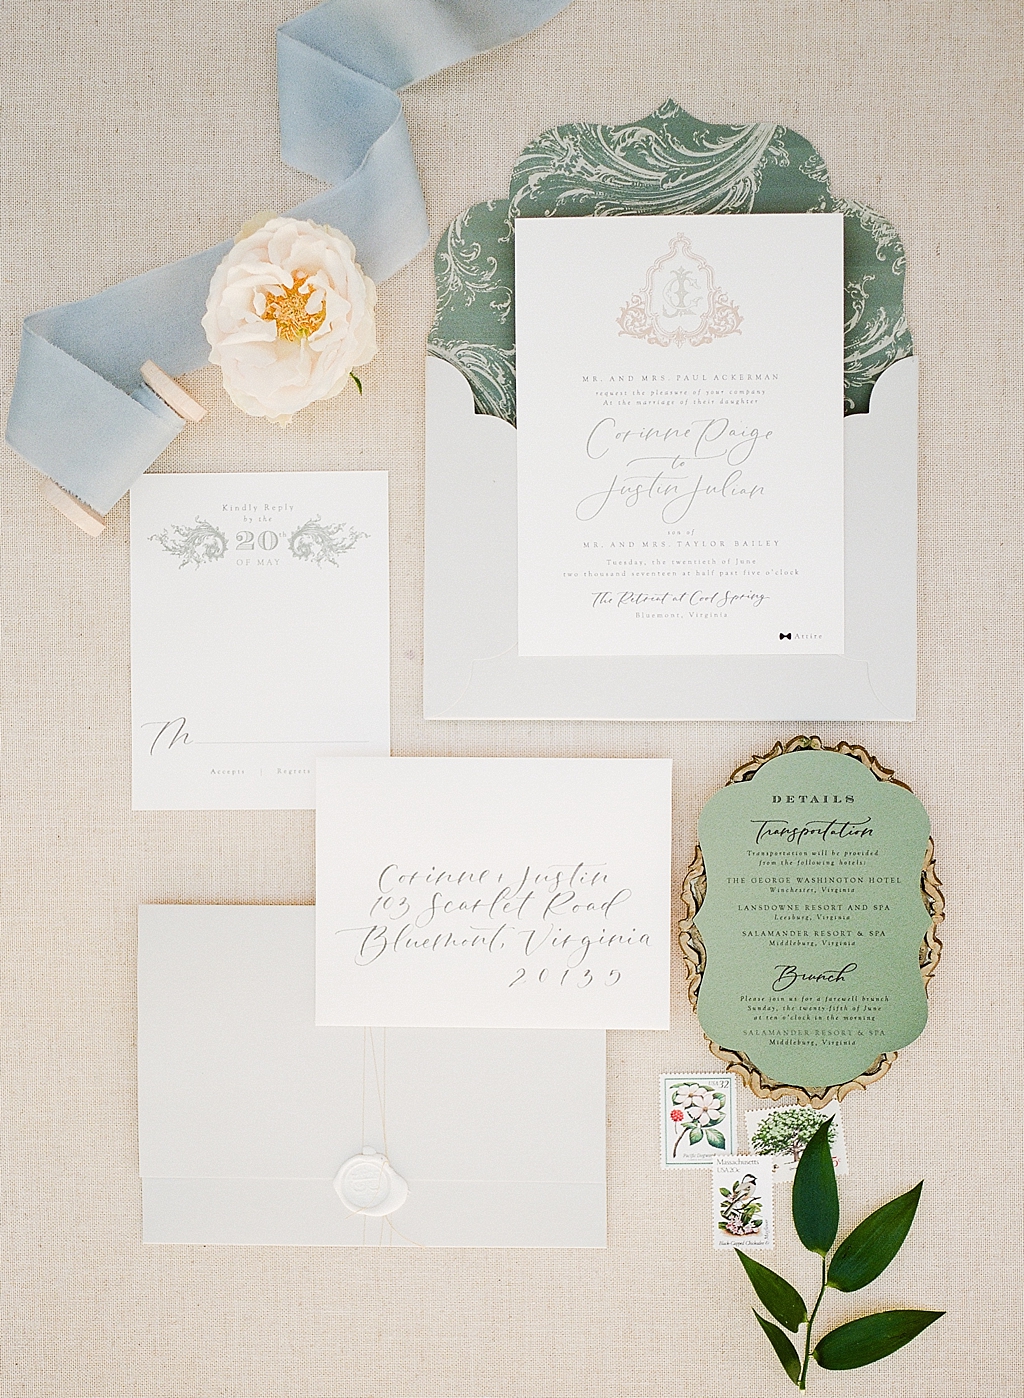 This regal Retreat at Coool Spring wedding features a stately color palette of lush blues, greens, and golds.